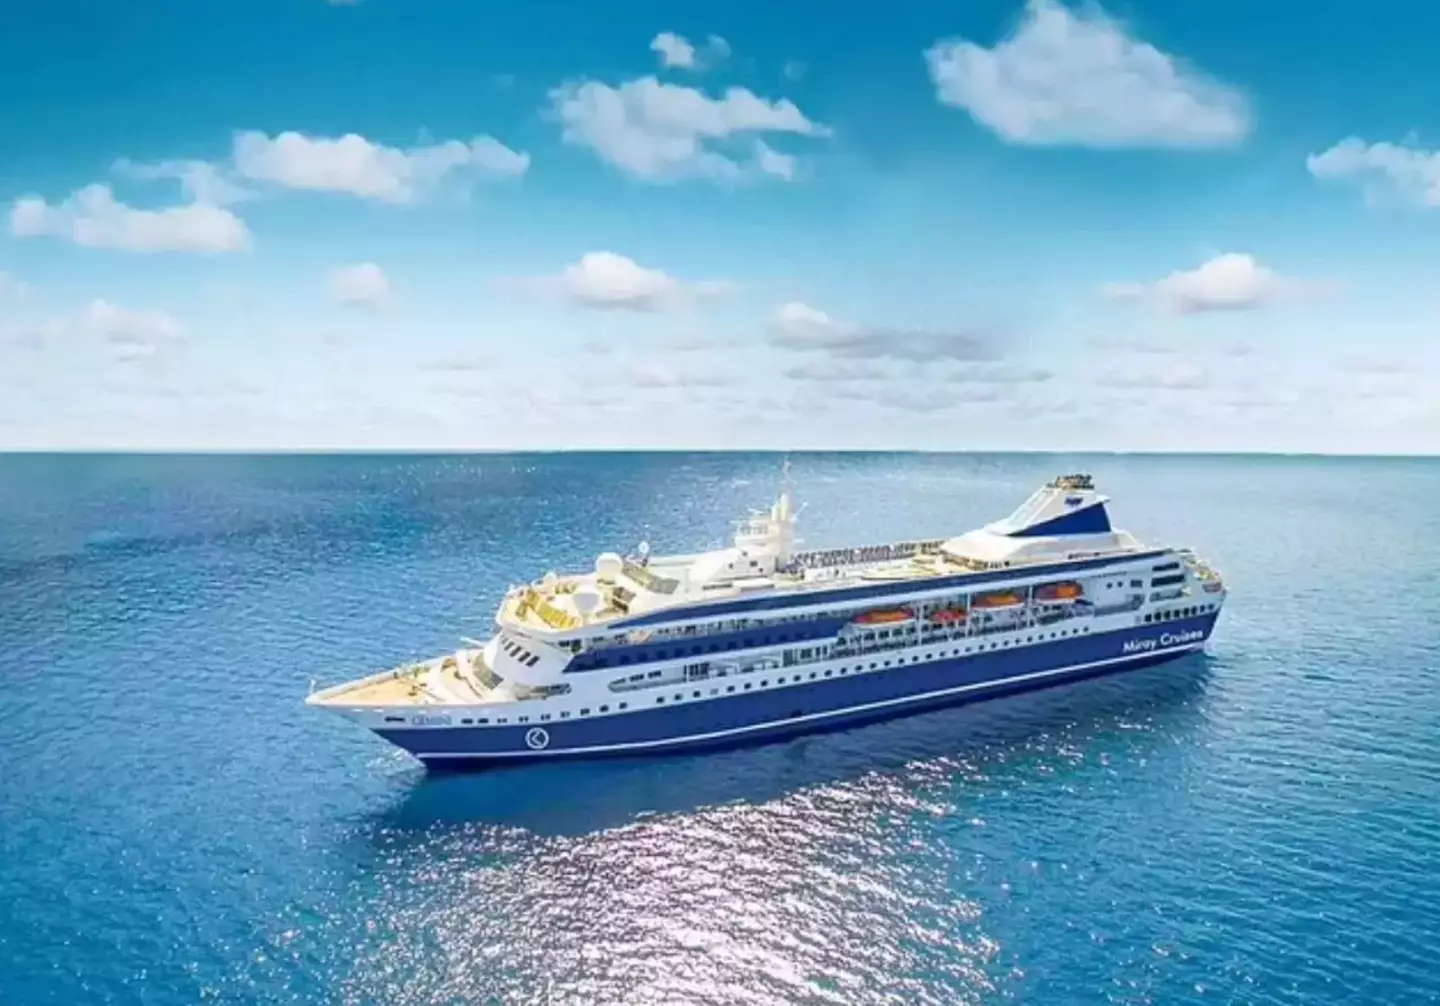 The voyage was canceled just days before it was set to depart.